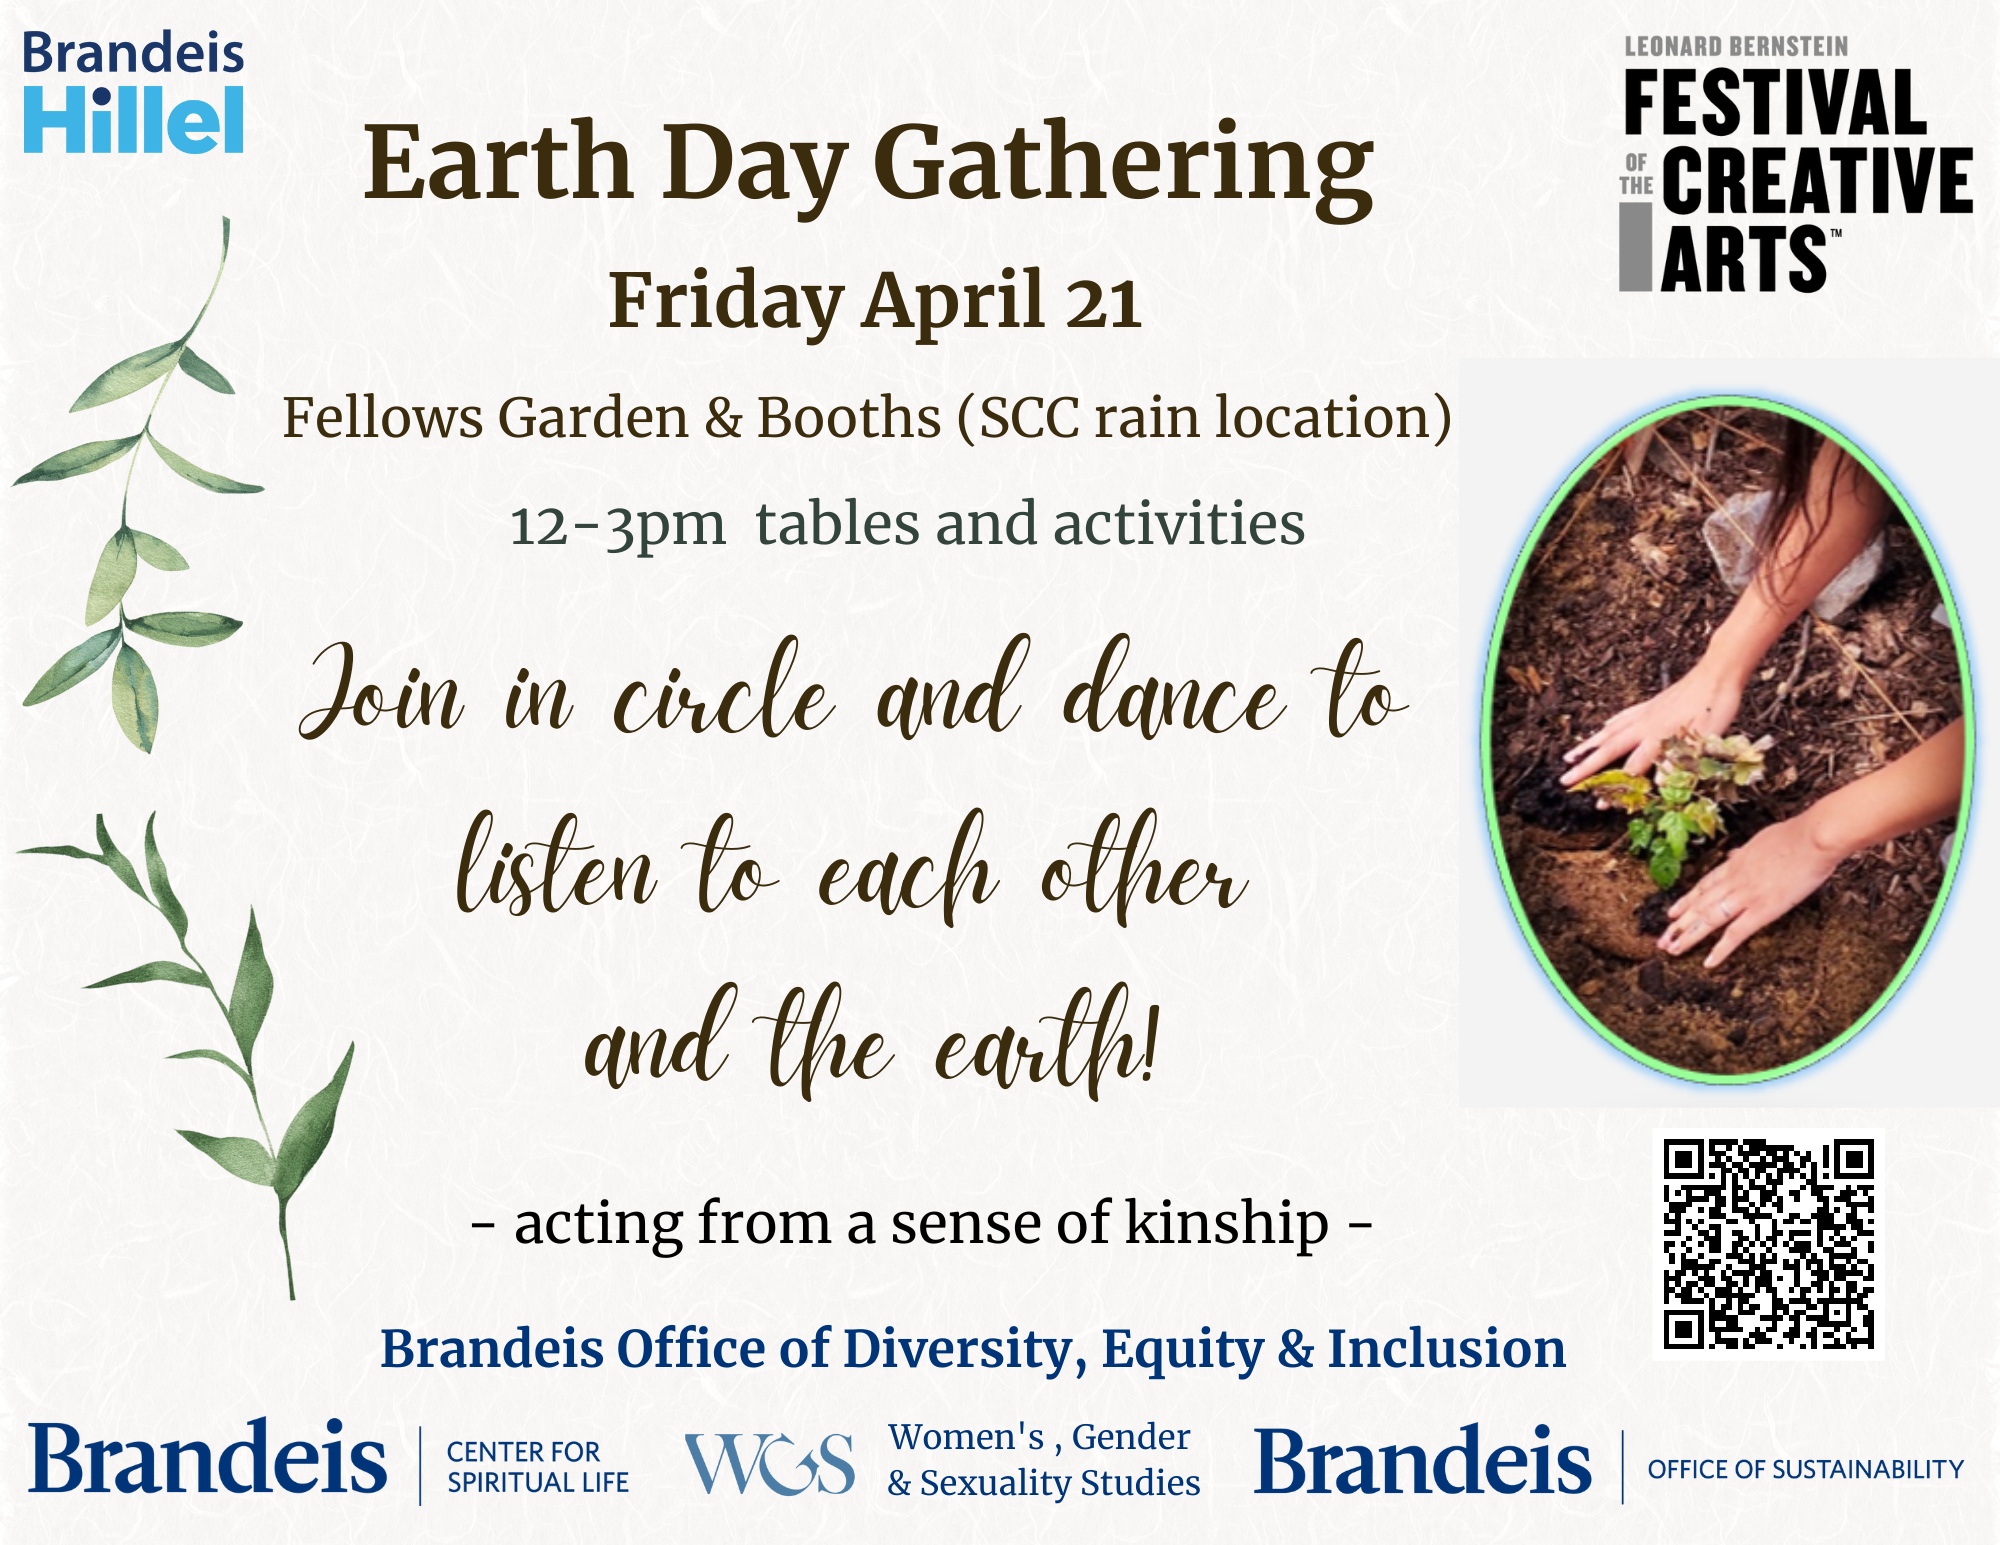 earth day gathering friday april 21 fellows garden and booths (scc rain location). join in circle and dance to listen to each other and the earth. acting from a sense of kinship.